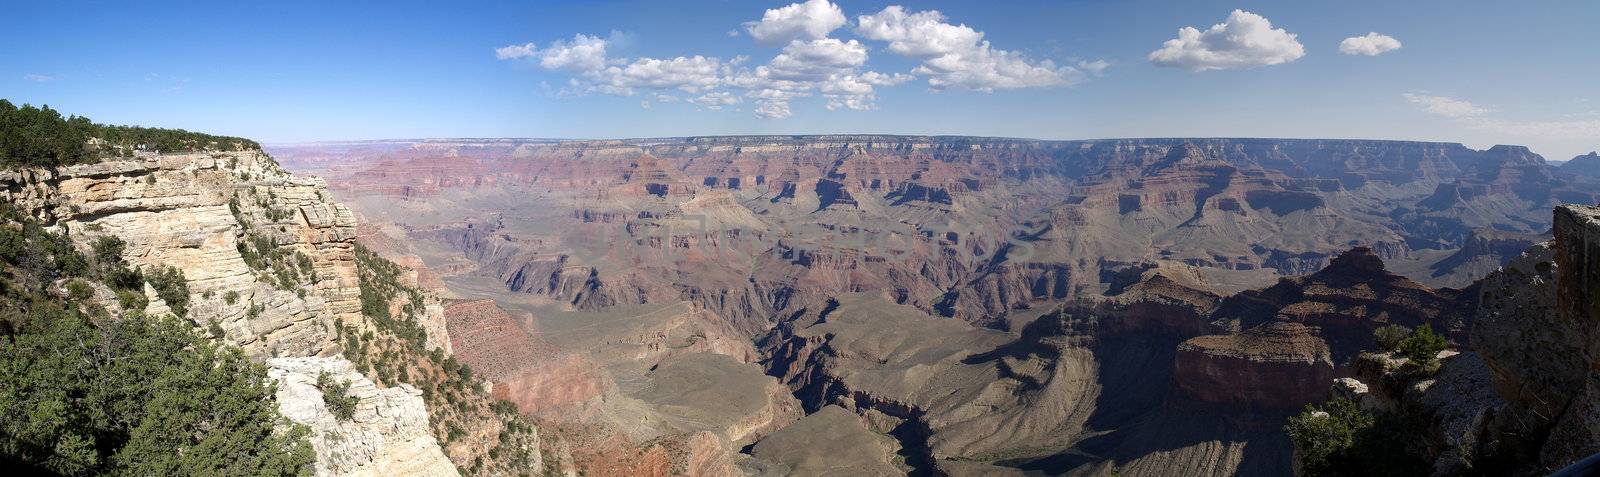 Panorama of the famous Grand Canyon by anderm